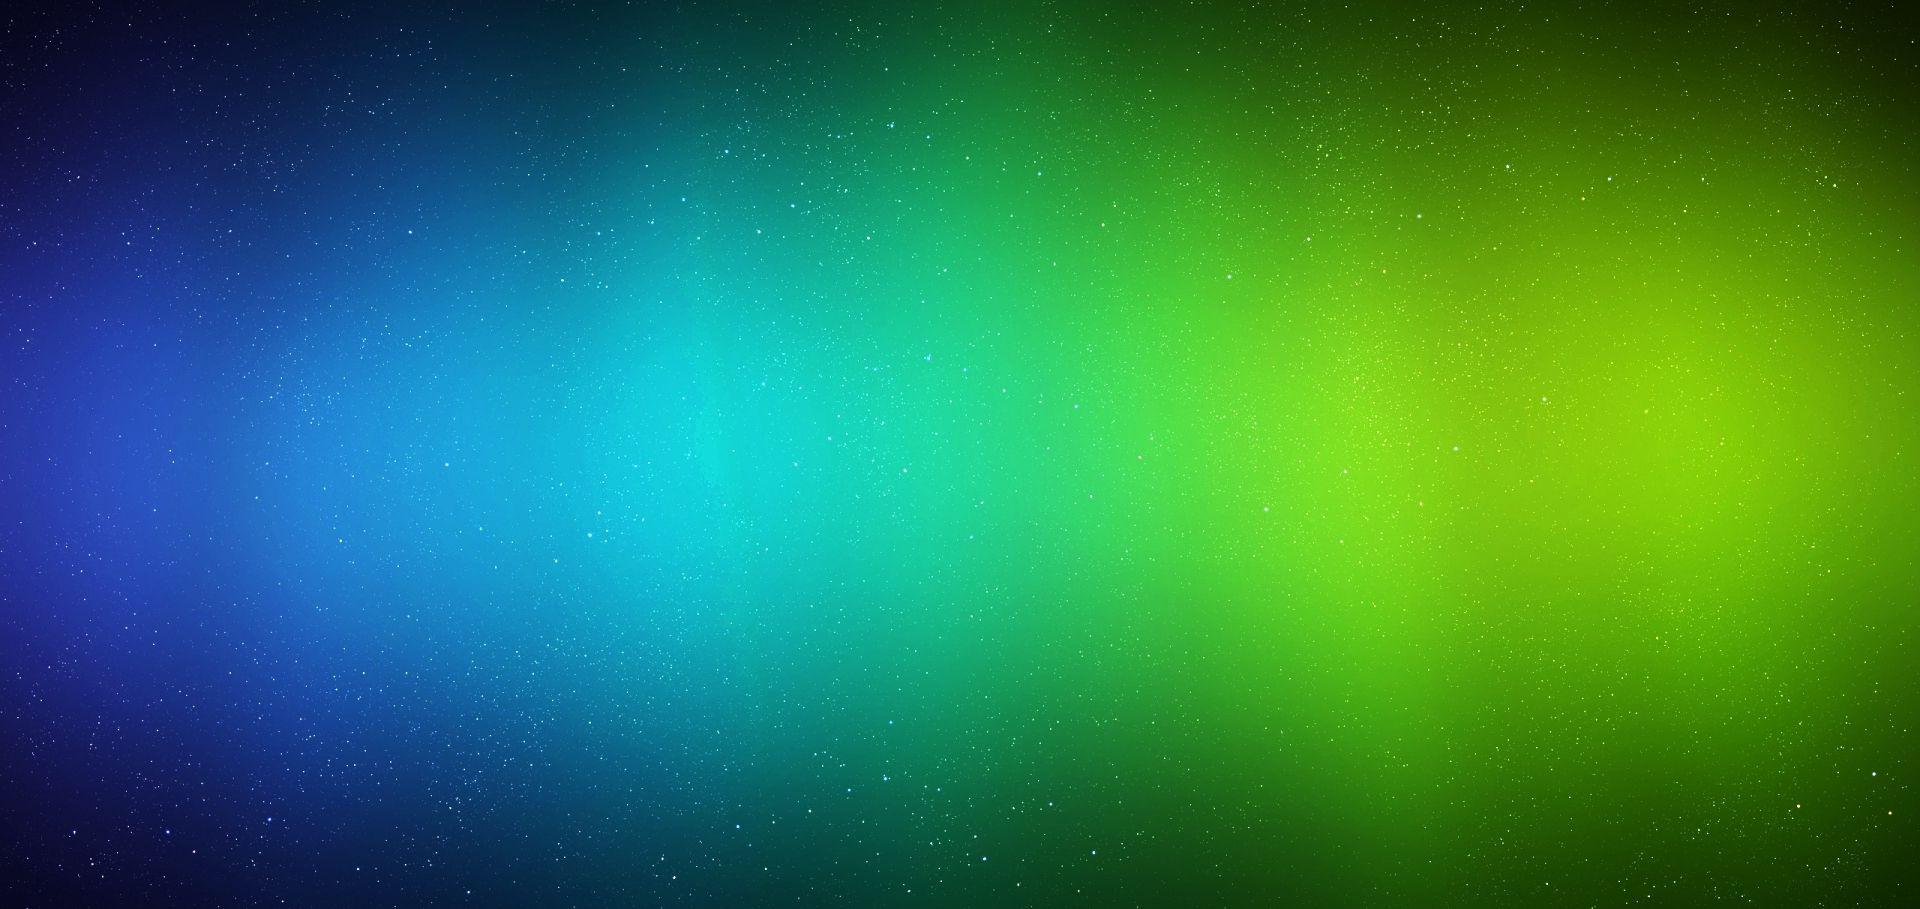 Blue and Green Abstract Wallpapers - Top Free Blue and Green Abstract